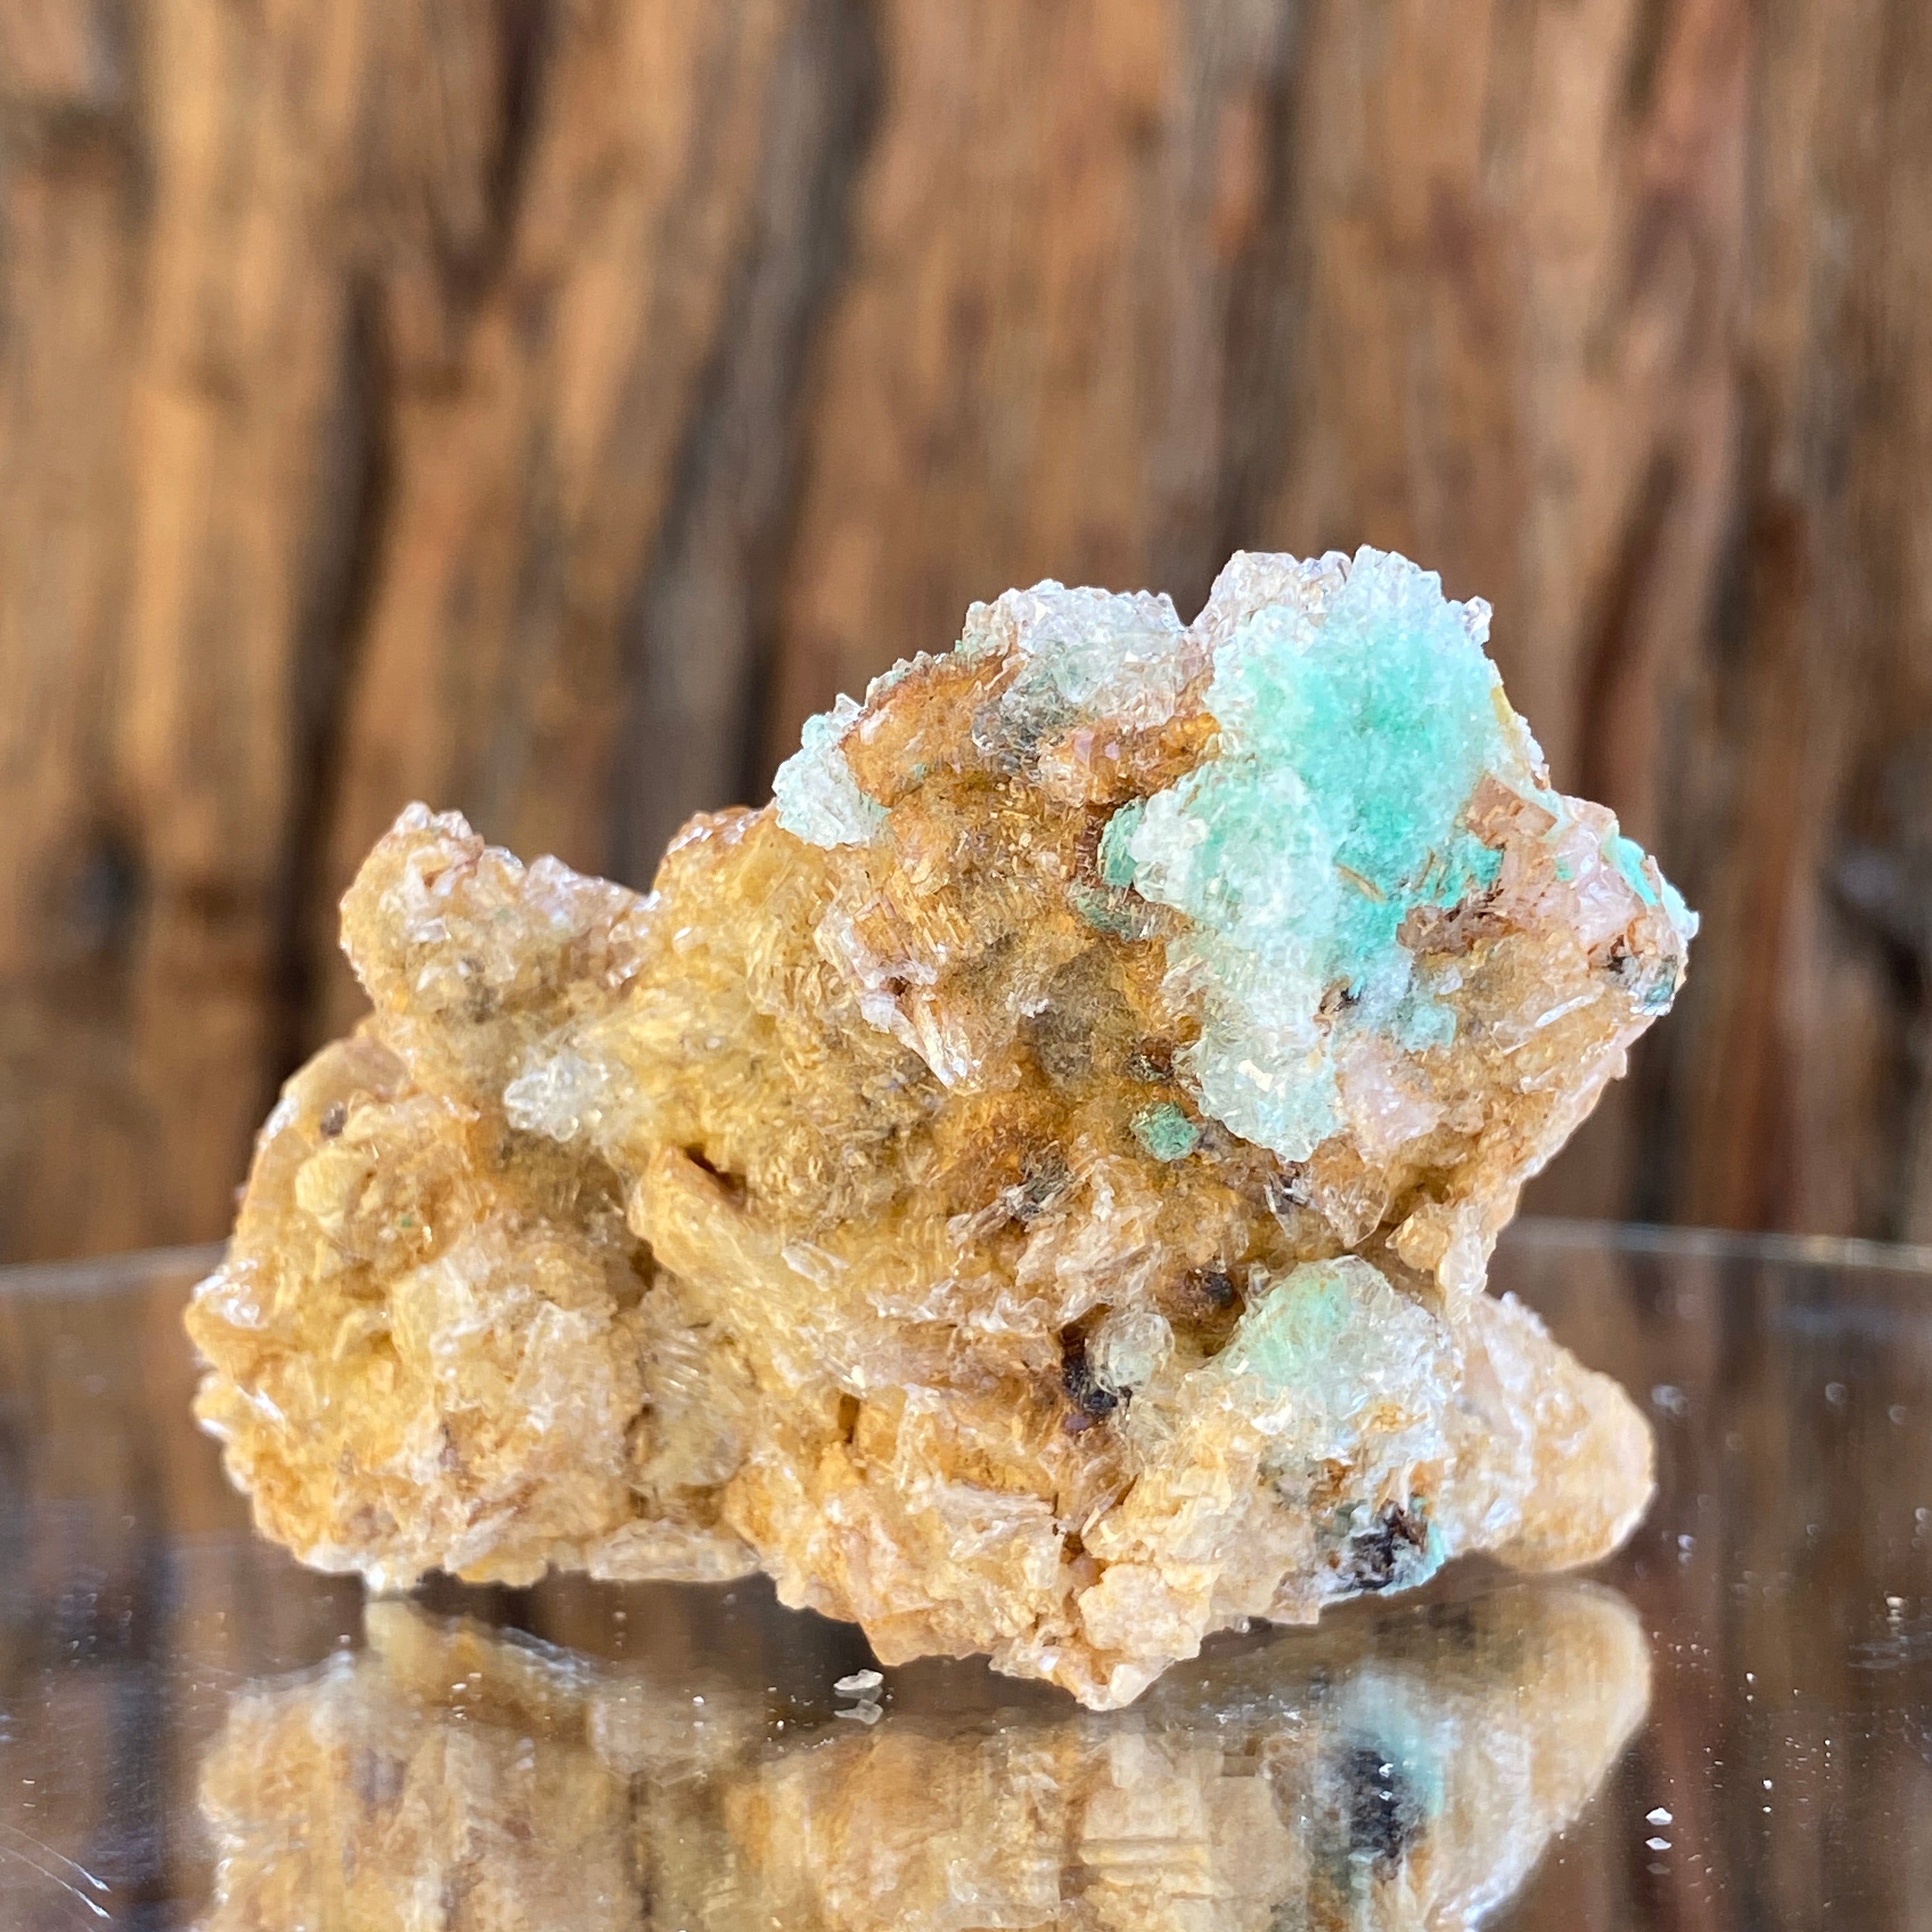 82g 6x6x4cm Blue Rosasite Dolomite from Morocco